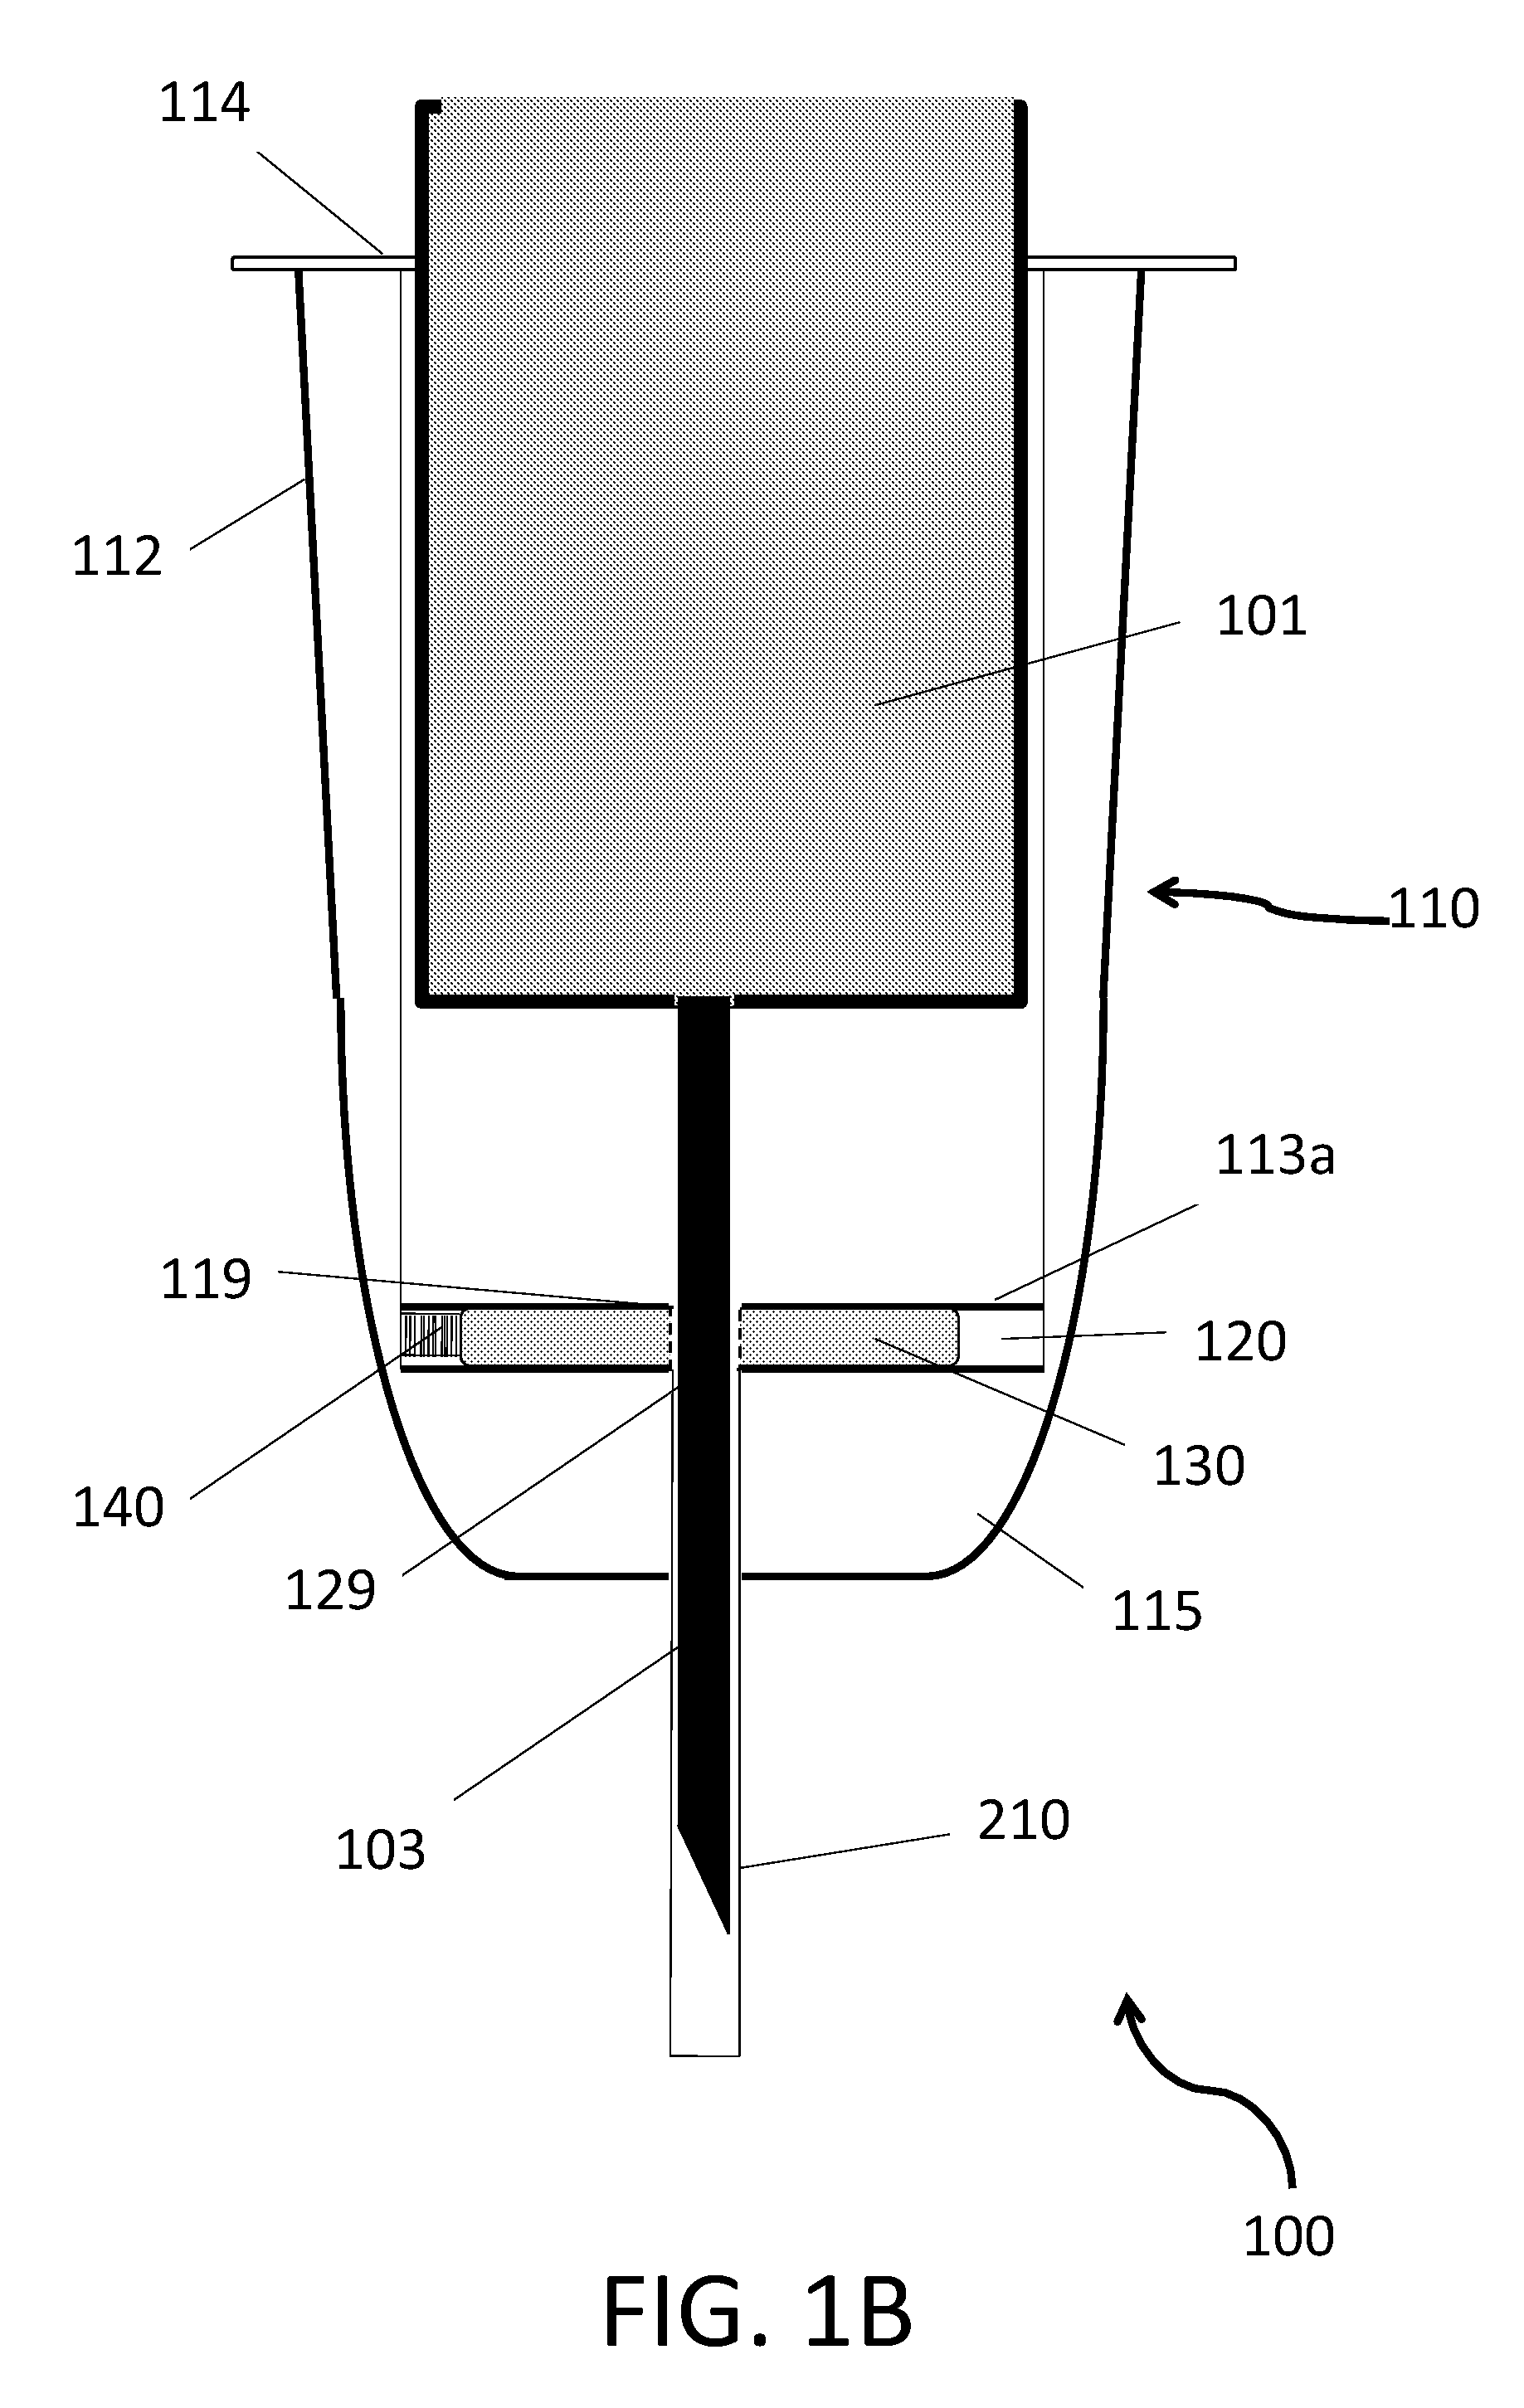 Angiocatheter System With Anti-Leak Features